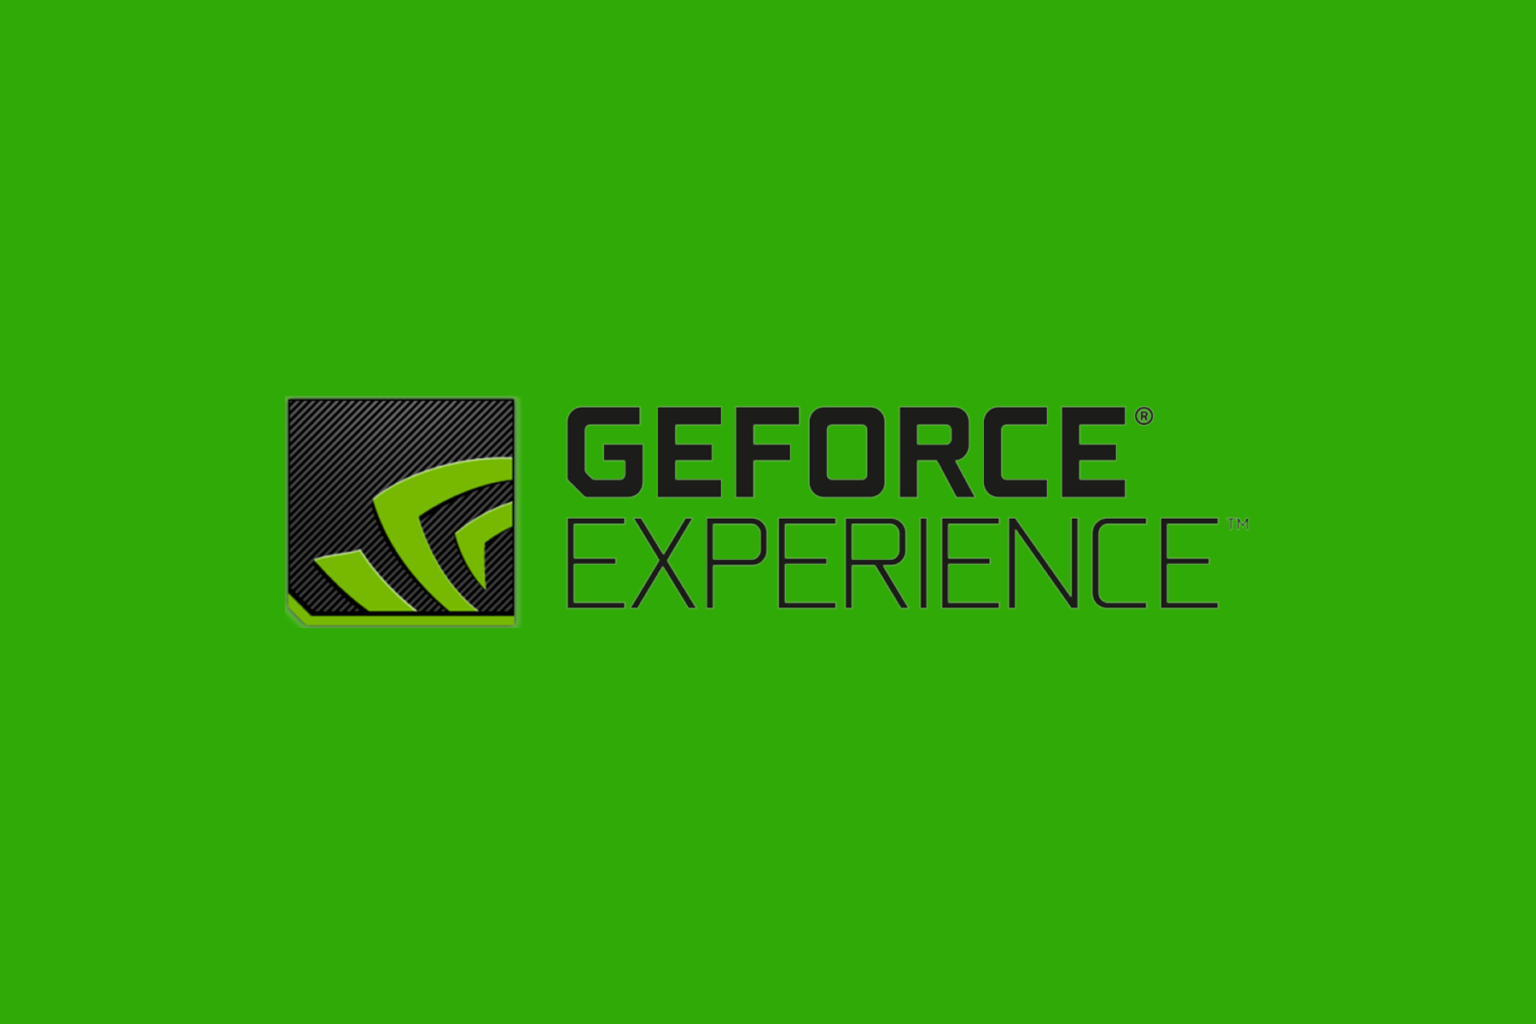 nvidia g force game cannot be optimized